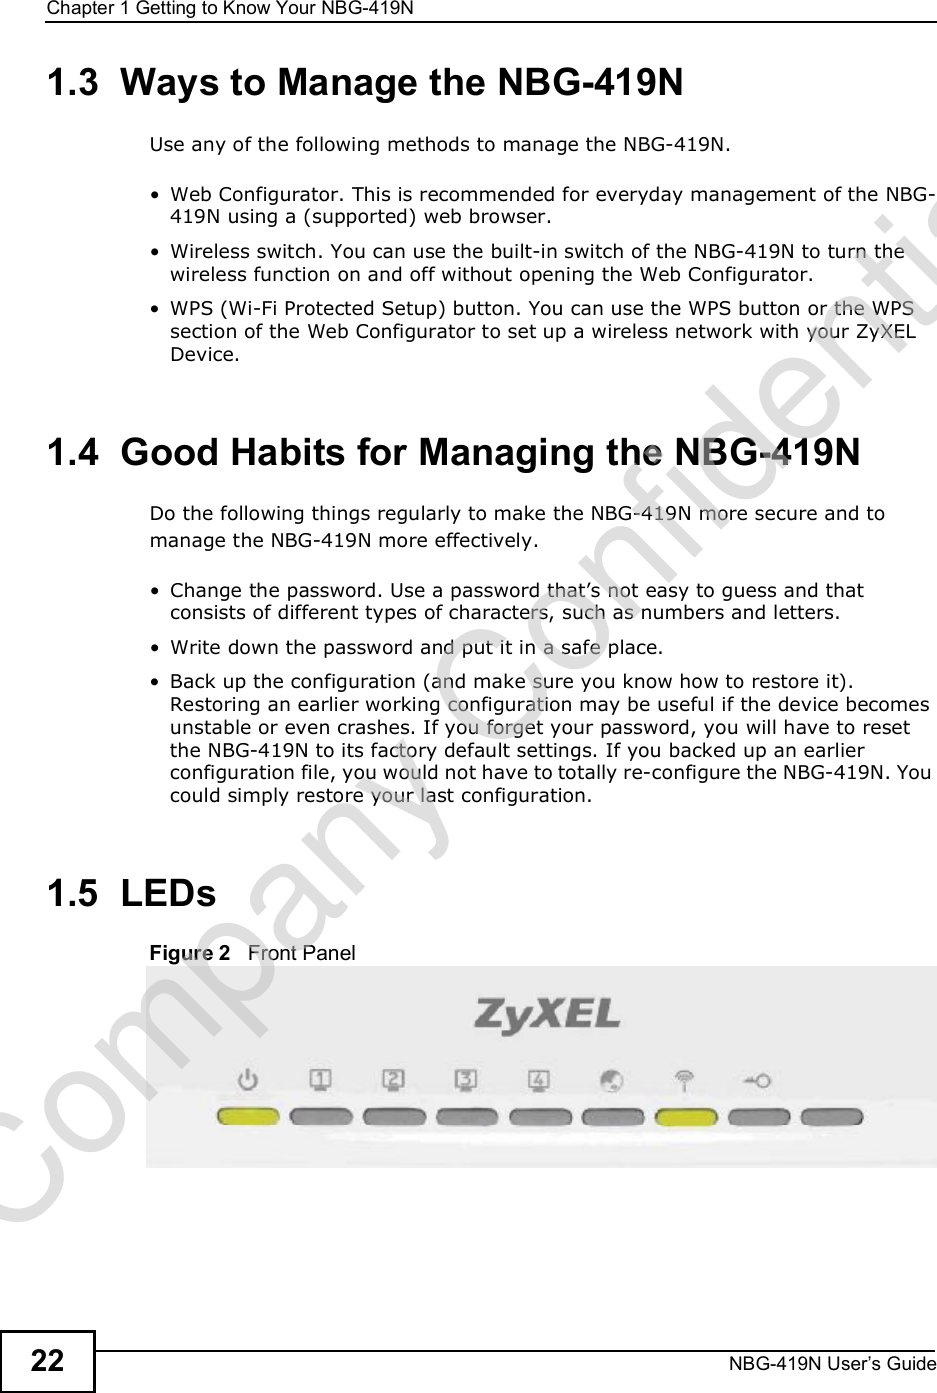 Chapter 1Getting to Know Your NBG-419NNBG-419N User s Guide221.3  Ways to Manage the NBG-419NUse any of the following methods to manage the NBG-419N. Web Configurator. This is recommended for everyday management of the NBG-419N using a (supported) web browser. Wireless switch. You can use the built-in switch of the NBG-419N to turn the wireless function on and off without opening the Web Configurator.  WPS (Wi-Fi Protected Setup) button. You can use the WPS button or the WPS section of the Web Configurator to set up a wireless network with your ZyXEL Device.1.4  Good Habits for Managing the NBG-419NDo the following things regularly to make the NBG-419N more secure and to manage the NBG-419N more effectively. Change the password. Use a password that!s not easy to guess and that consists of different types of characters, such as numbers and letters. Write down the password and put it in a safe place. Back up the configuration (and make sure you know how to restore it). Restoring an earlier working configuration may be useful if the device becomes unstable or even crashes. If you forget your password, you will have to reset the NBG-419N to its factory default settings. If you backed up an earlier configuration file, you would not have to totally re-configure the NBG-419N. You could simply restore your last configuration.1.5  LEDsFigure 2   Front PanelCompany Confidential